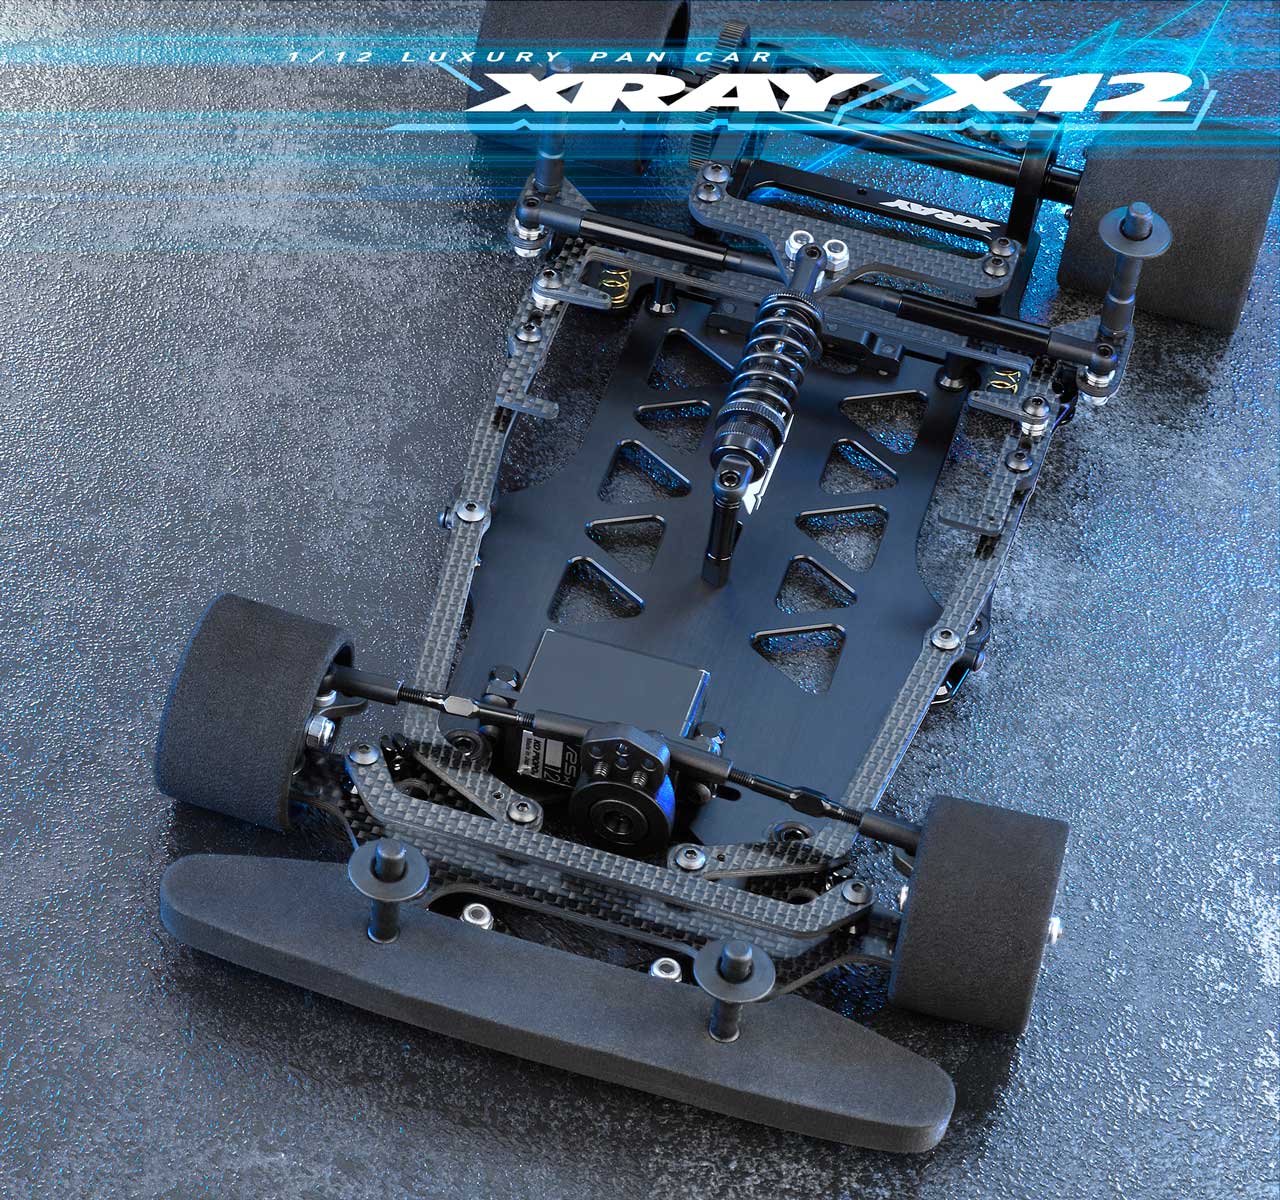 Features | XRAY X12'22